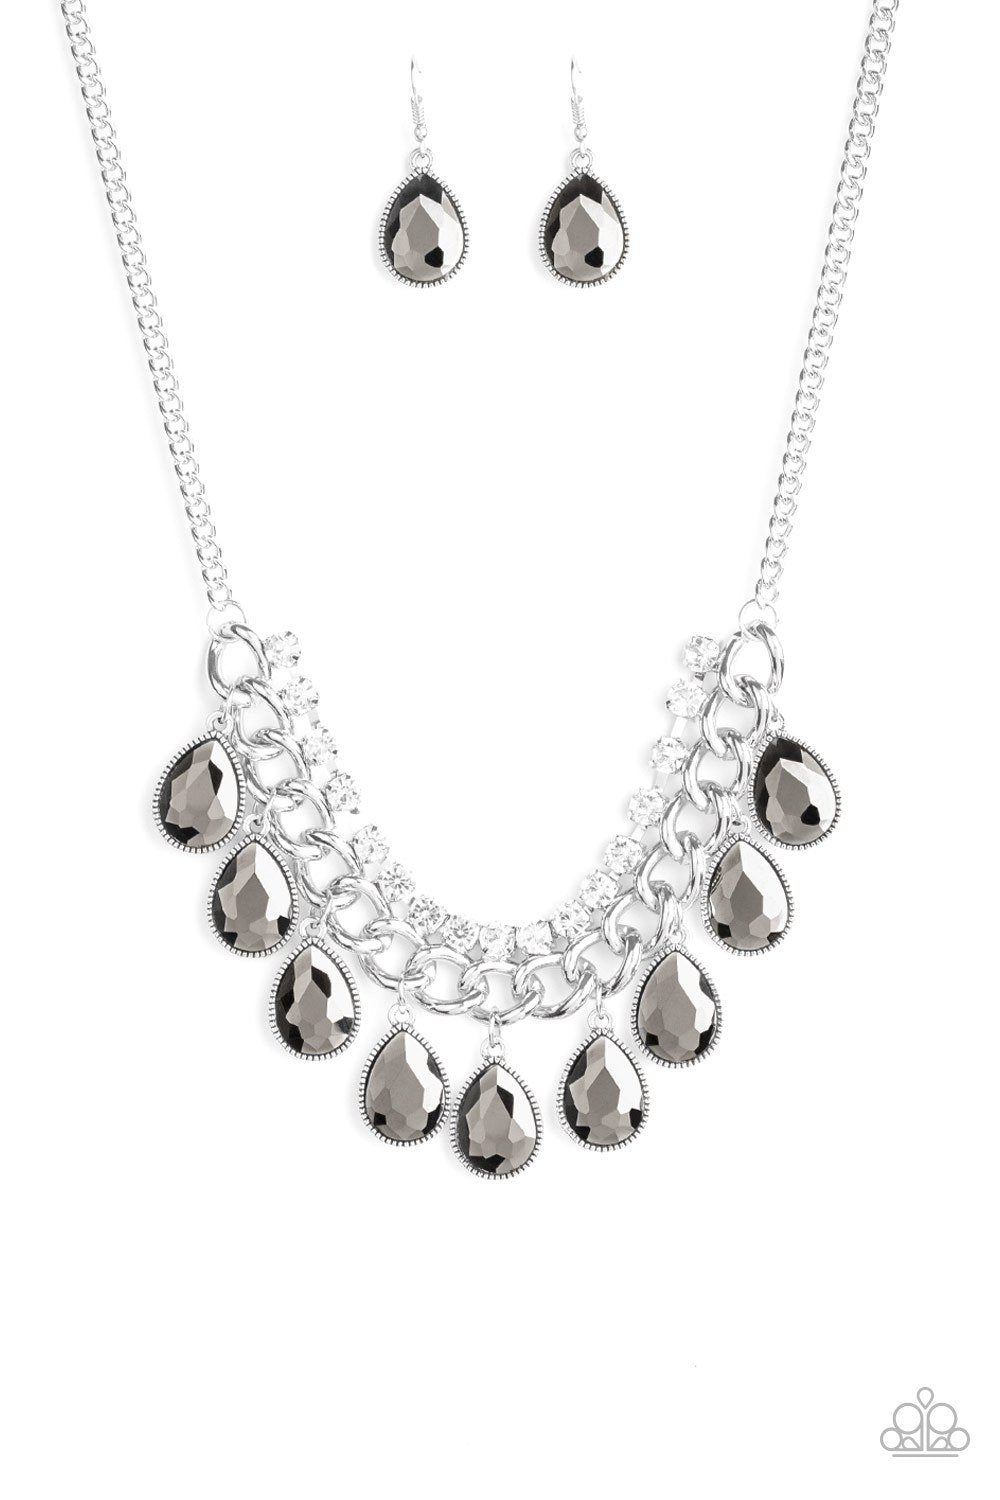 All Toget-HEIR now Silver Teardrop Necklace - Paparazzi Accessories-CarasShop.com - $5 Jewelry by Cara Jewels